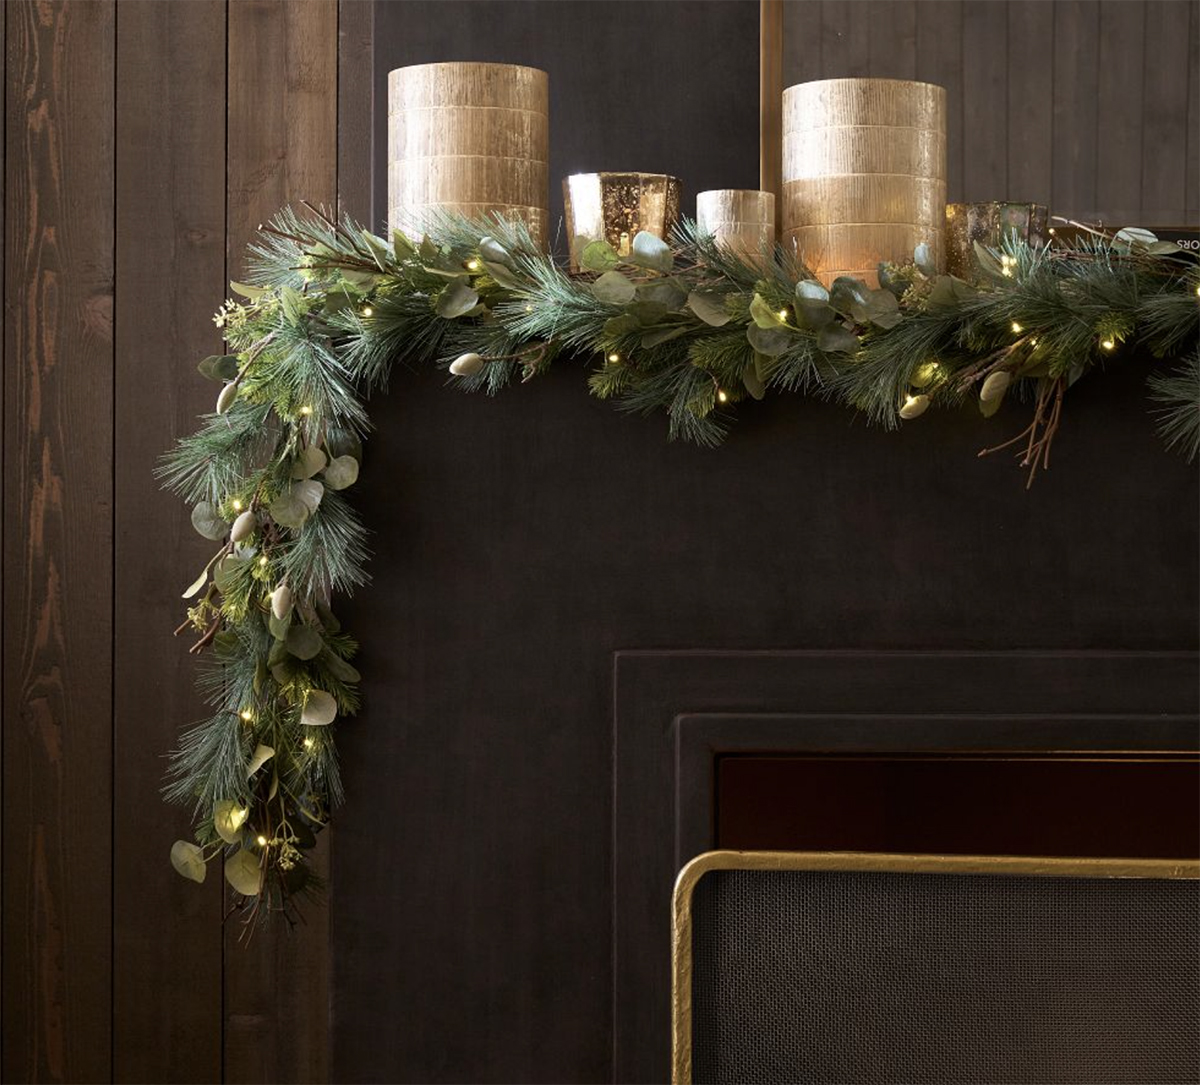 faux pre-lit eucalyptus and pine garland draped over black fireplace with gold candles on the mantel